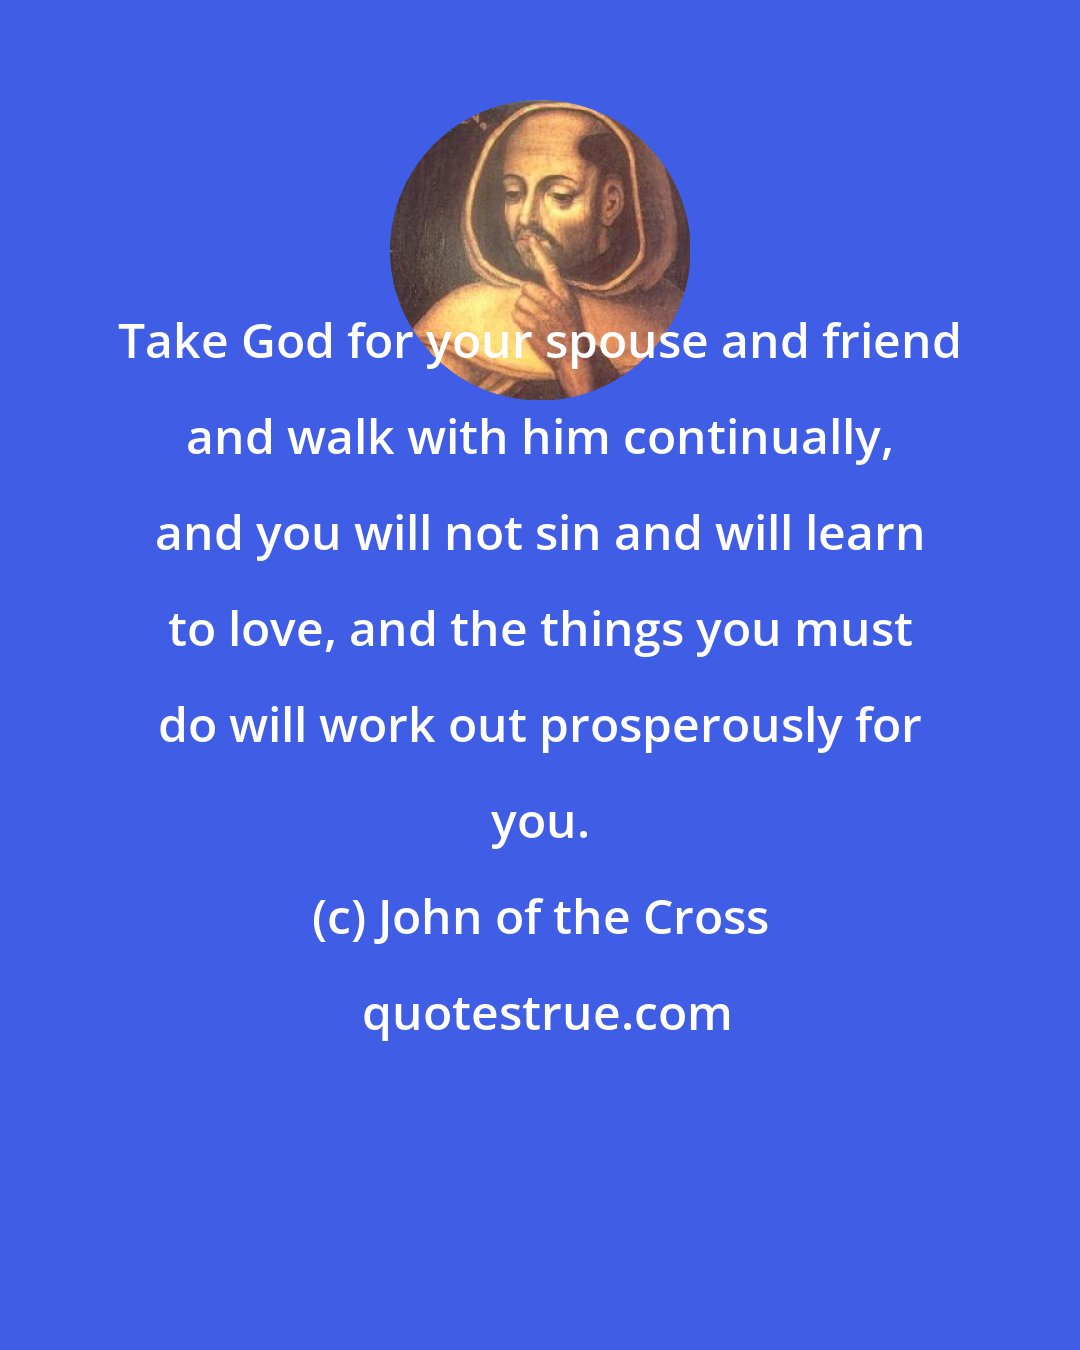 John of the Cross: Take God for your spouse and friend and walk with him continually, and you will not sin and will learn to love, and the things you must do will work out prosperously for you.